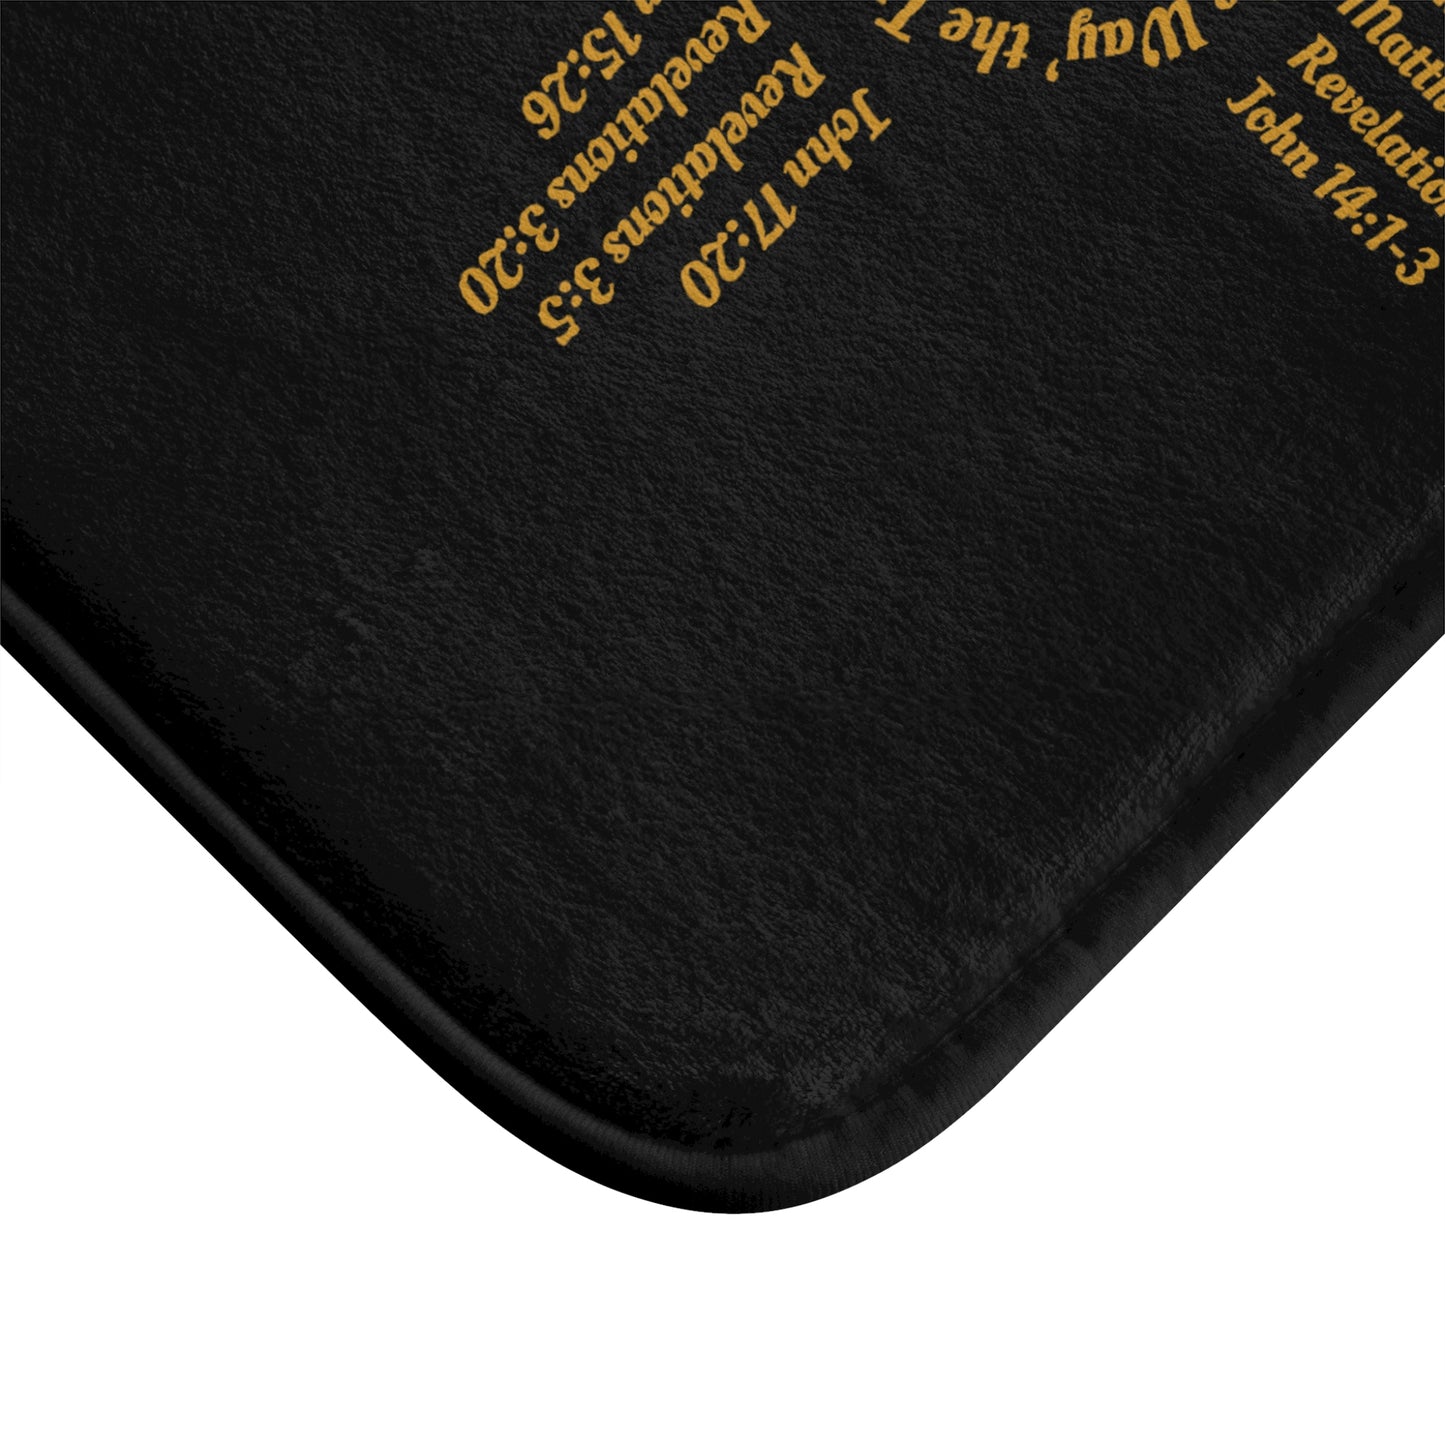 Black Bath Mat with Gold Zia Biblical Scriptures, A New Mexico Icon & Favorite!